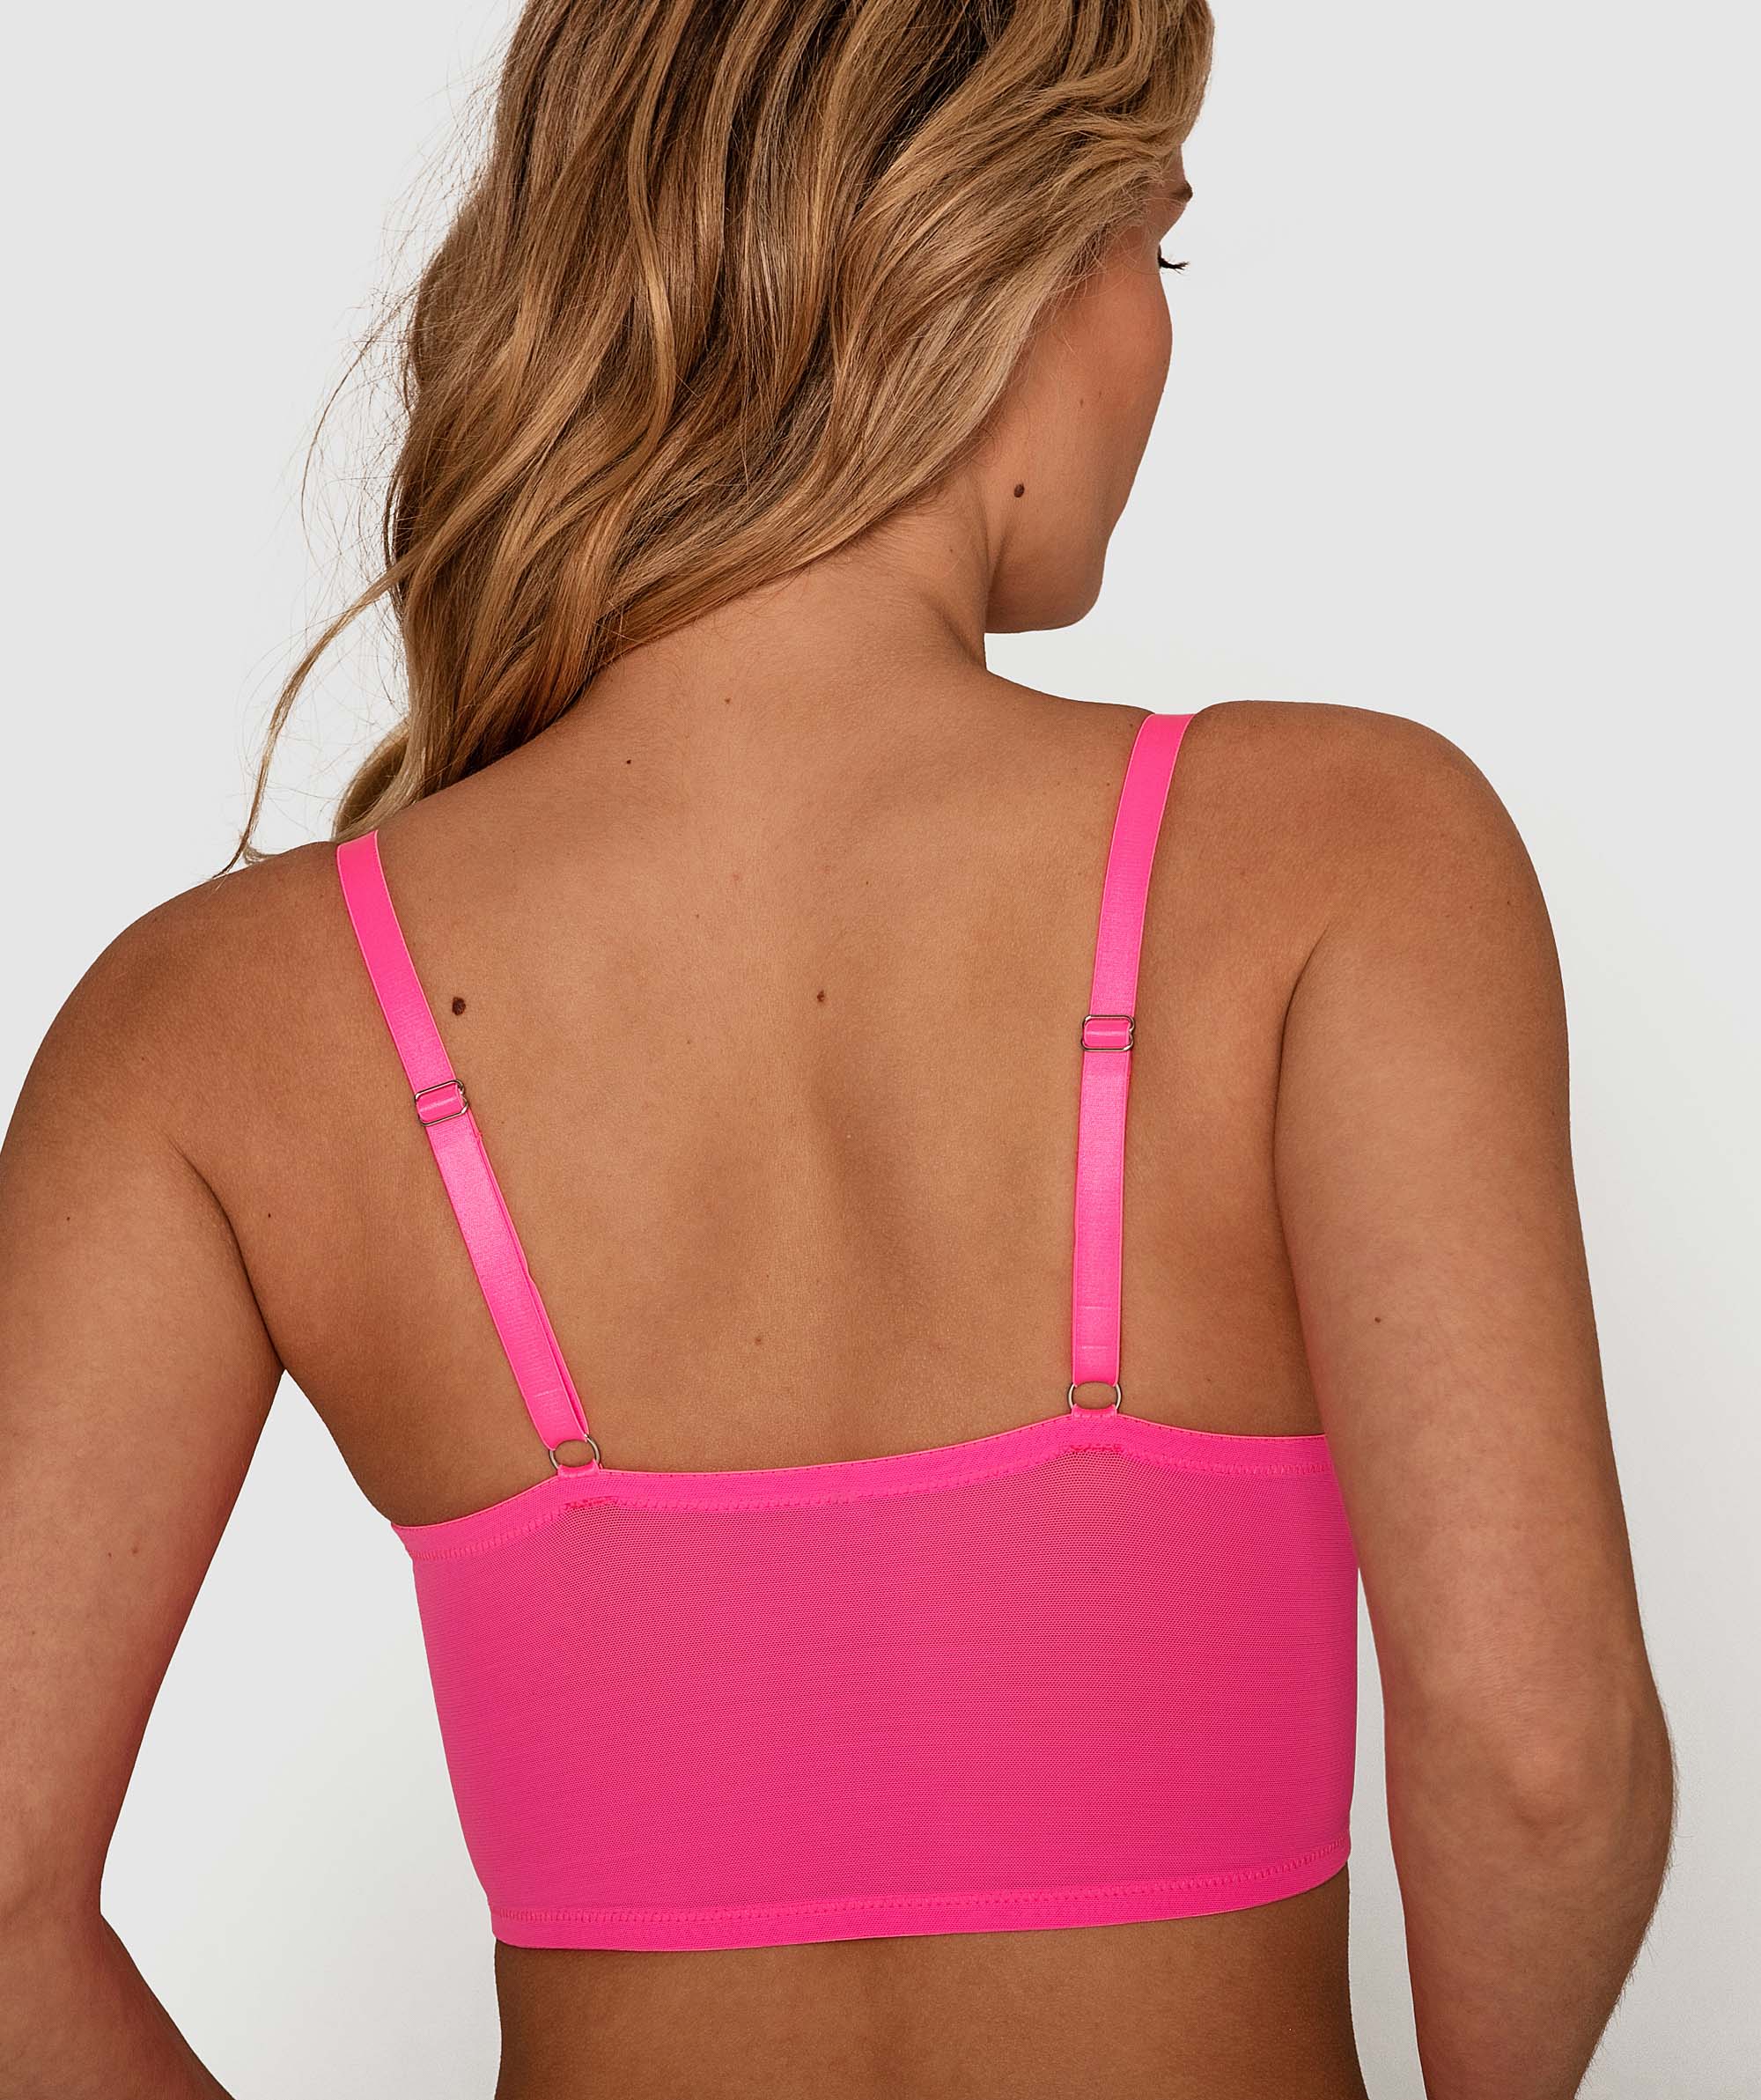 Vamp Haven't You Heard Double Push Up Bra - Hot Pink